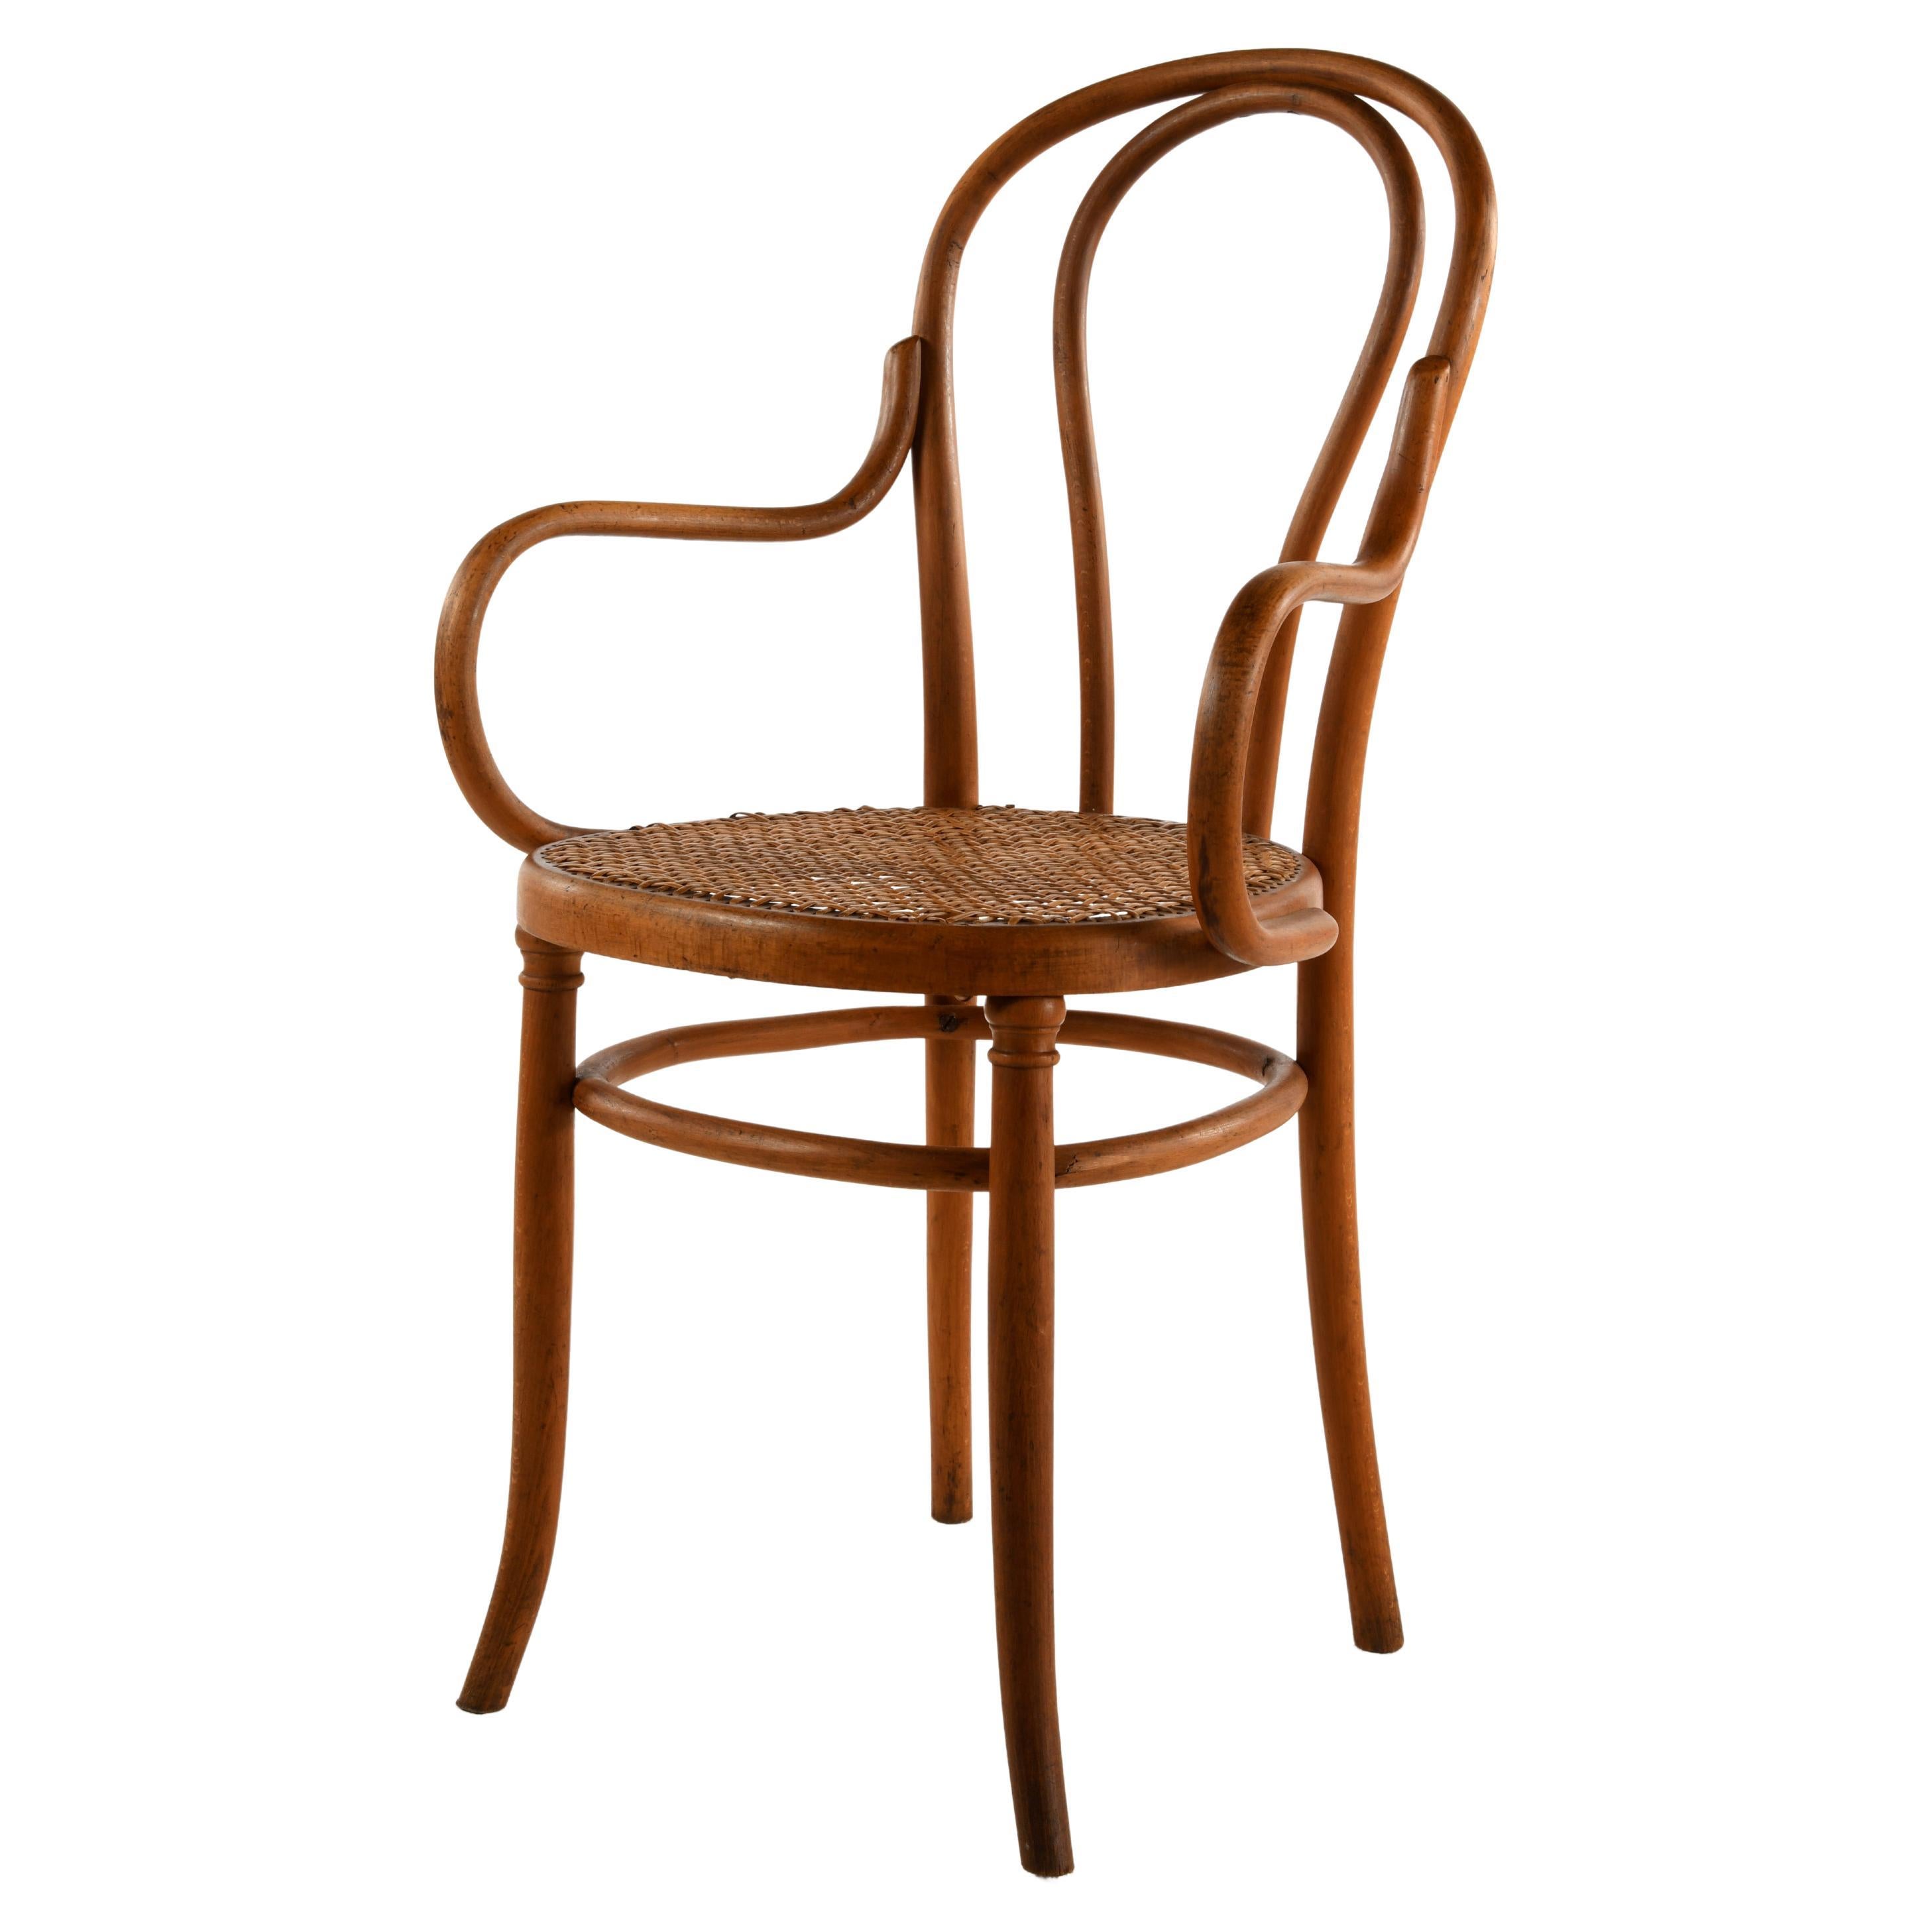 Bentwood armchair produced by the Fischel company between 1890 and 1910 For Sale